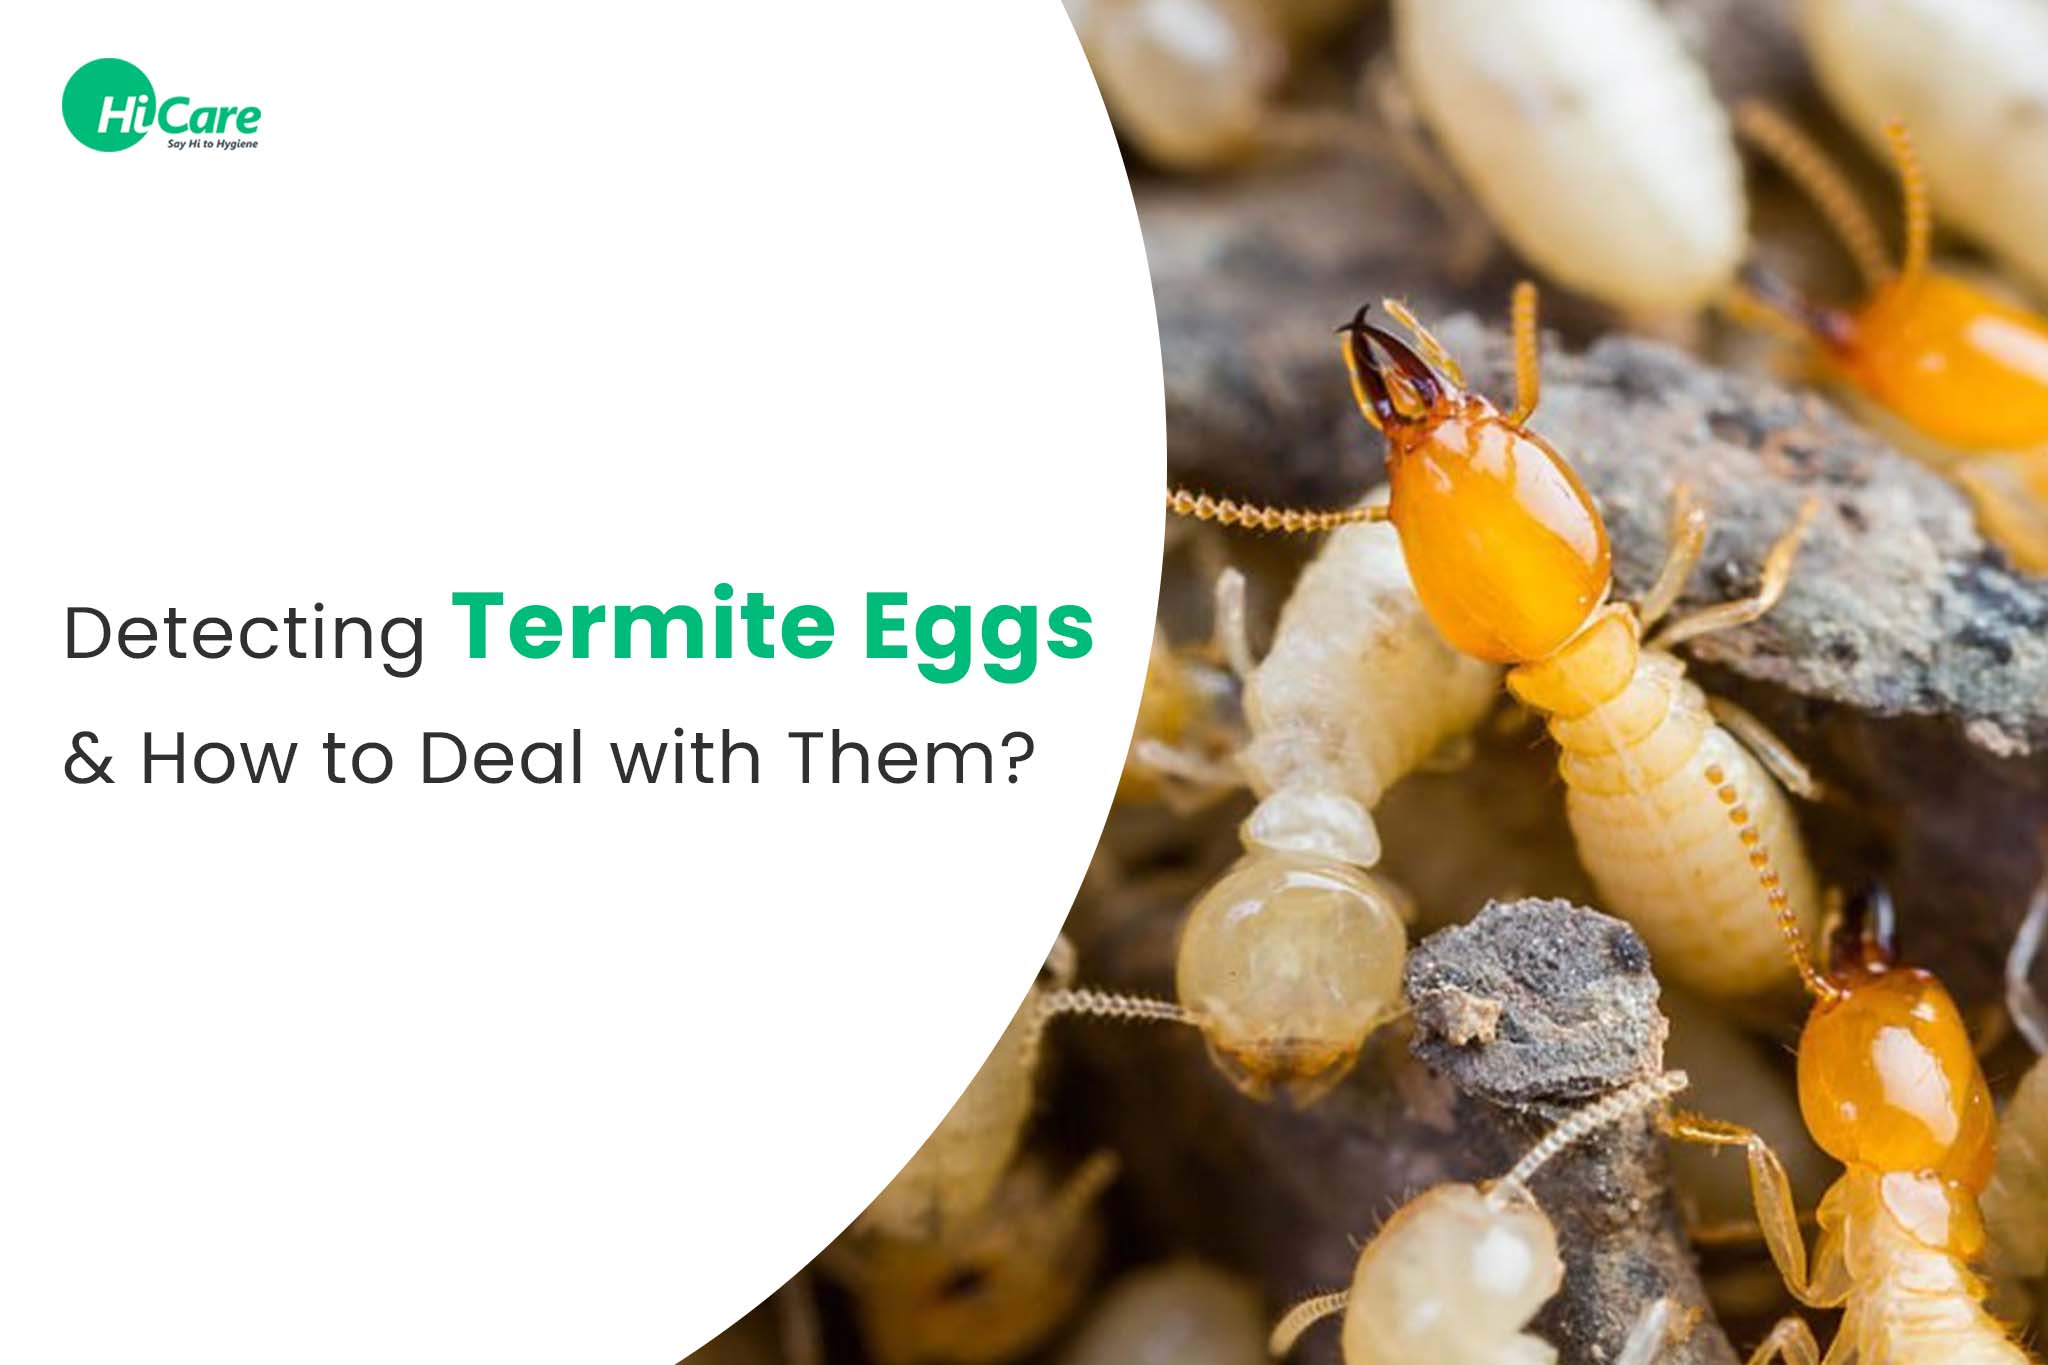 Detecting Termite Eggs and How to Deal with Them